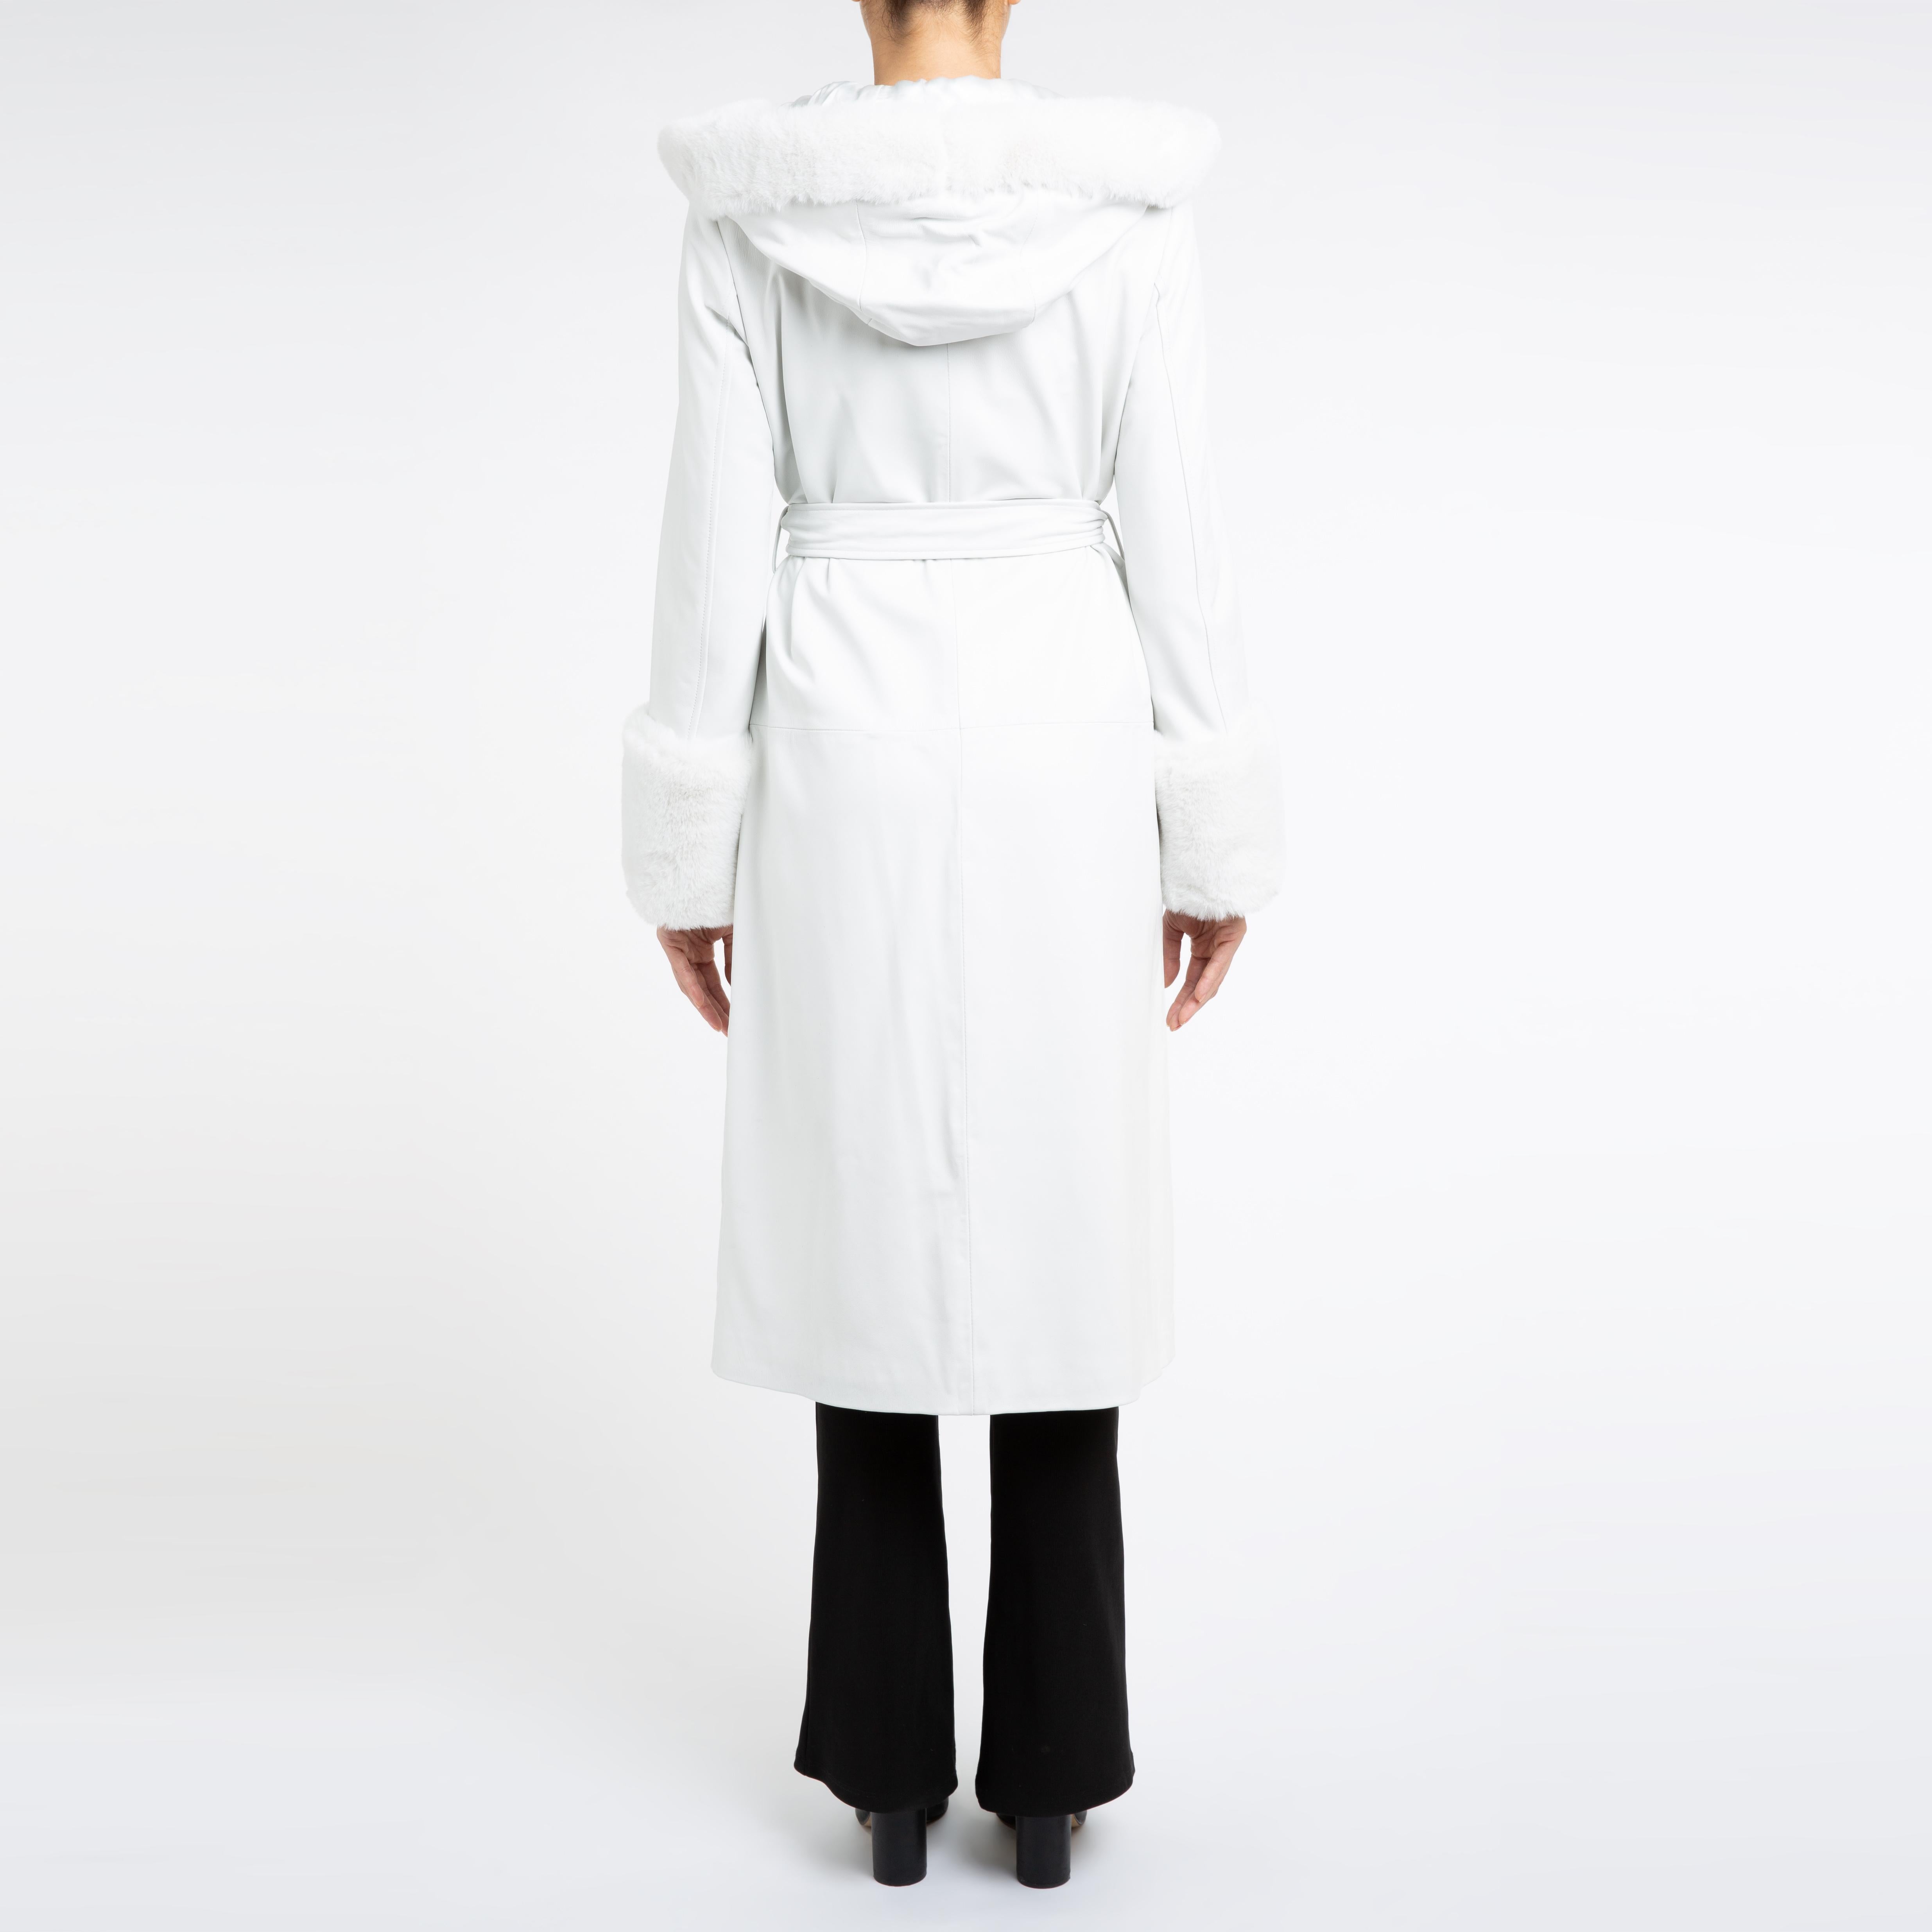 Verheyen Aurora Hooded Leather Trench Coat in White with Faux Fur - Size uk 14 For Sale 5